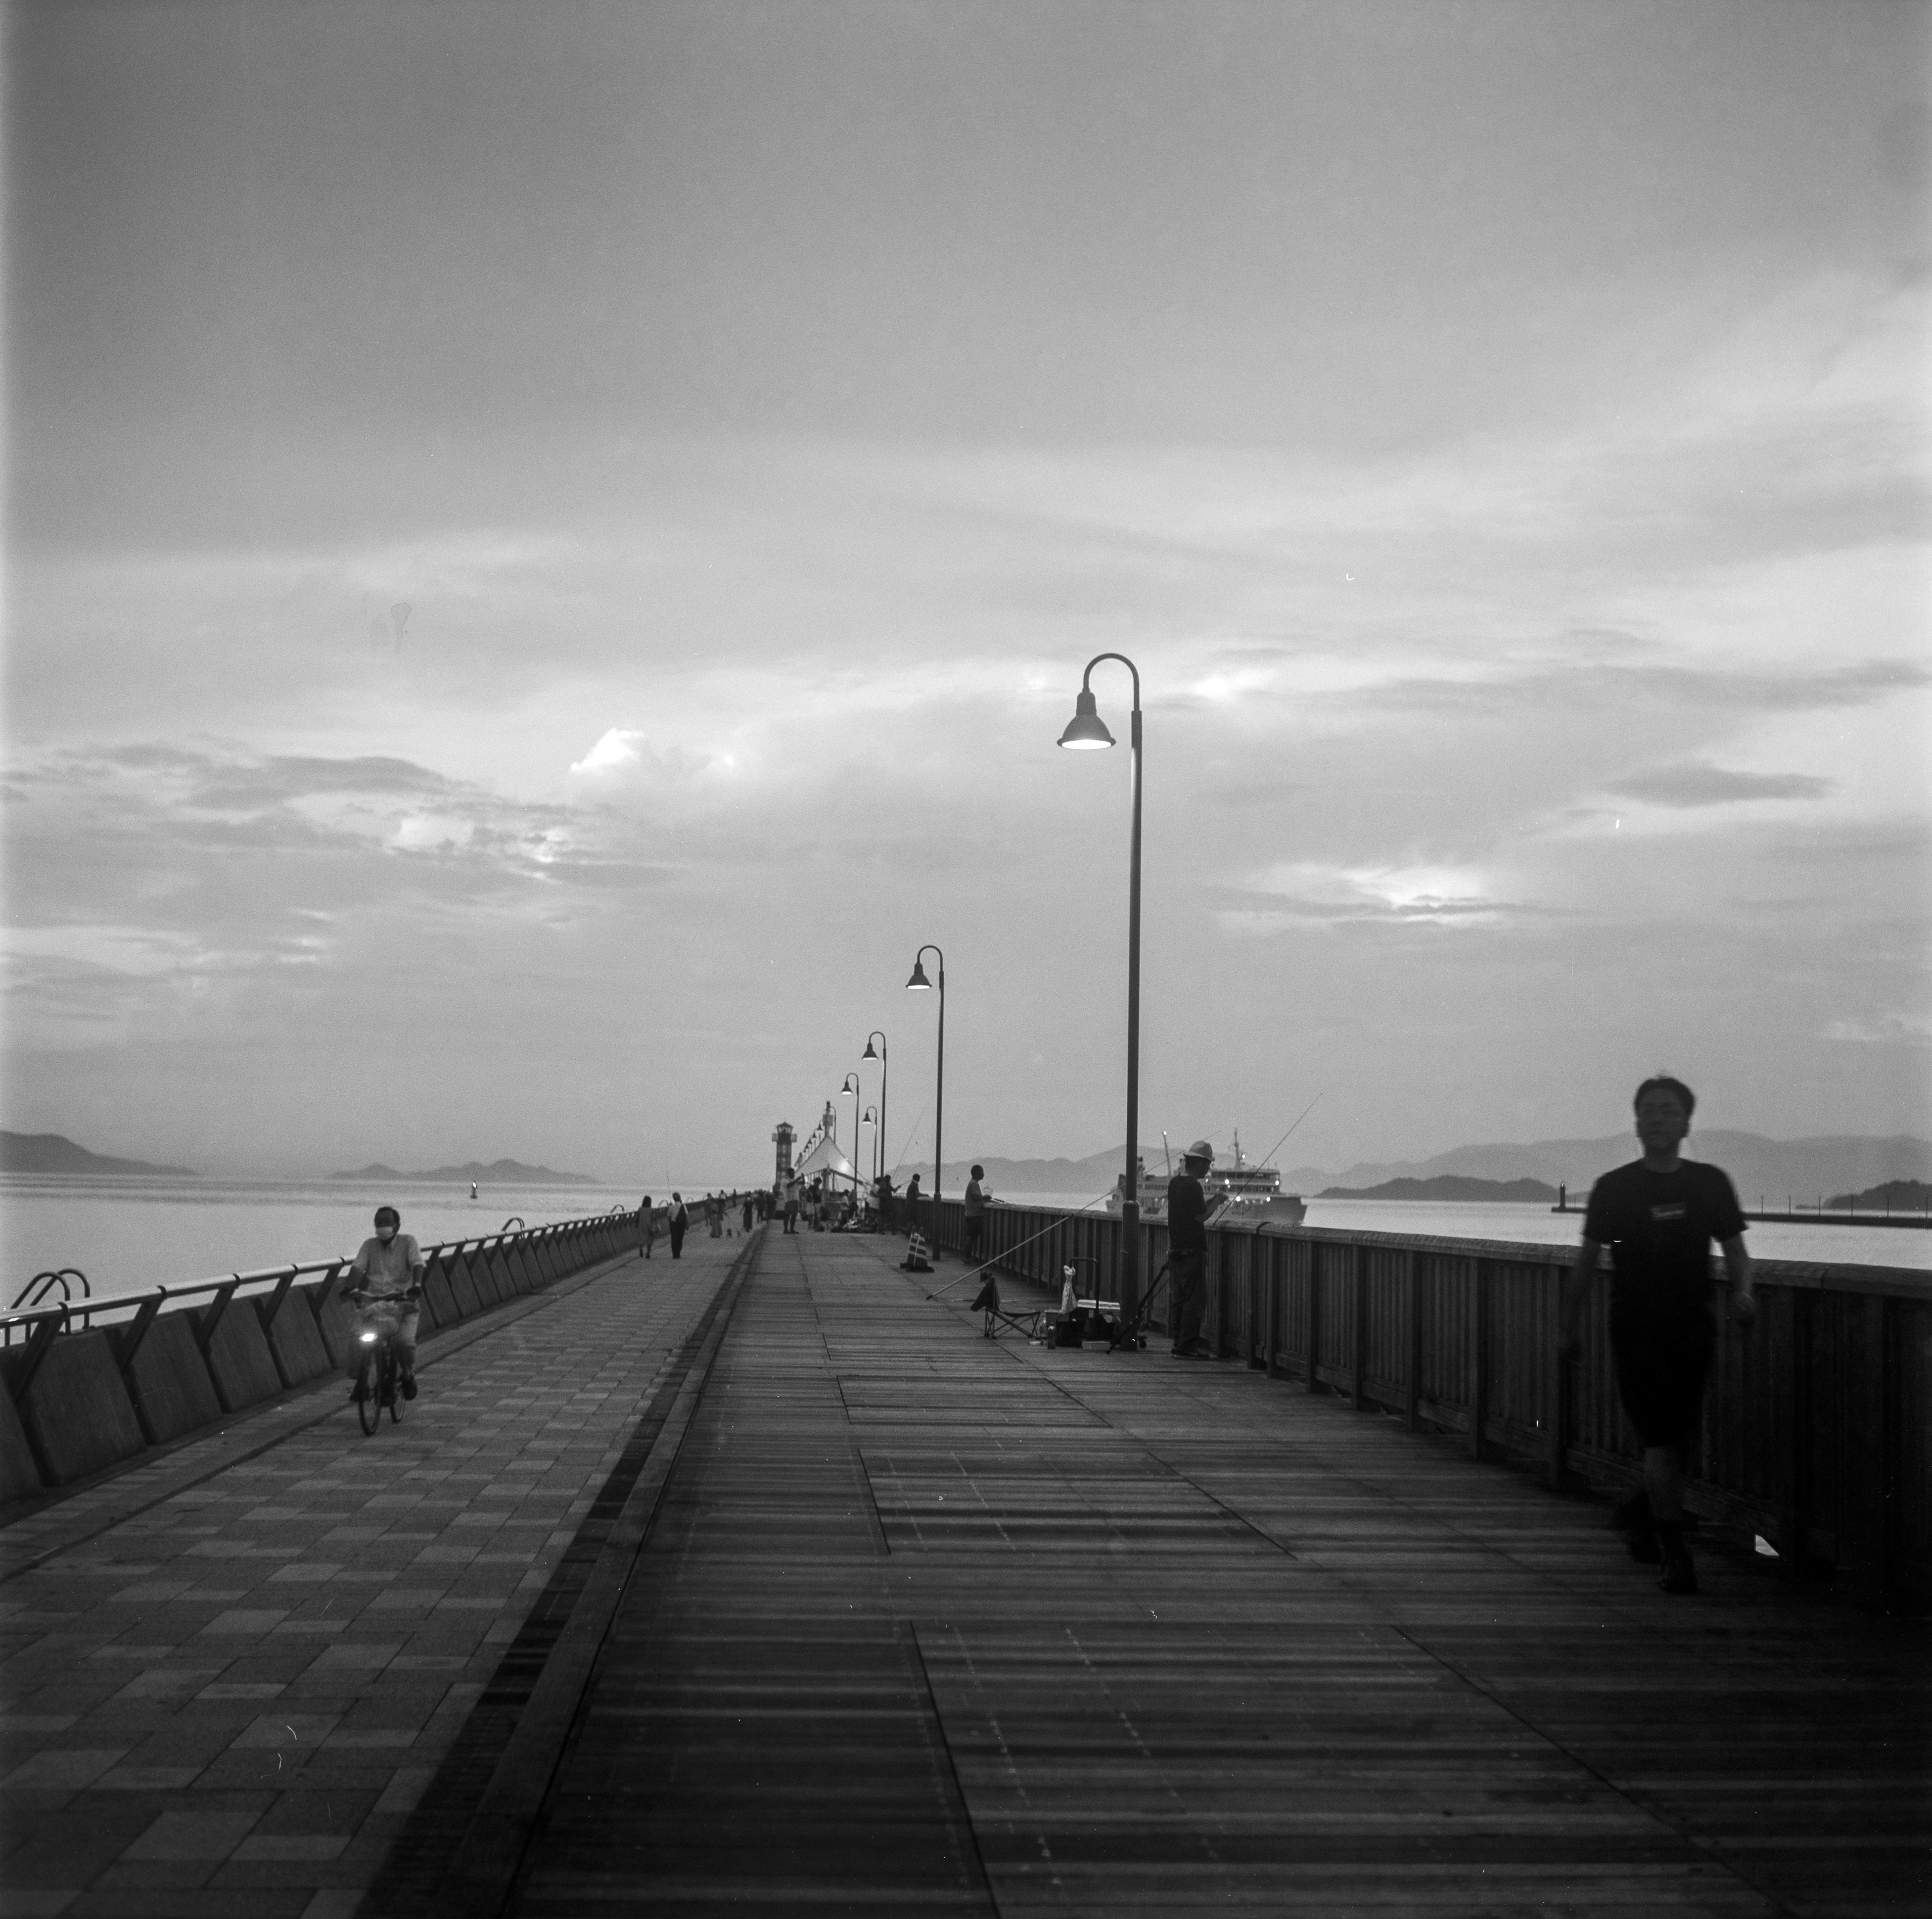 people walking on wooden dock under cloudy sky during daytime